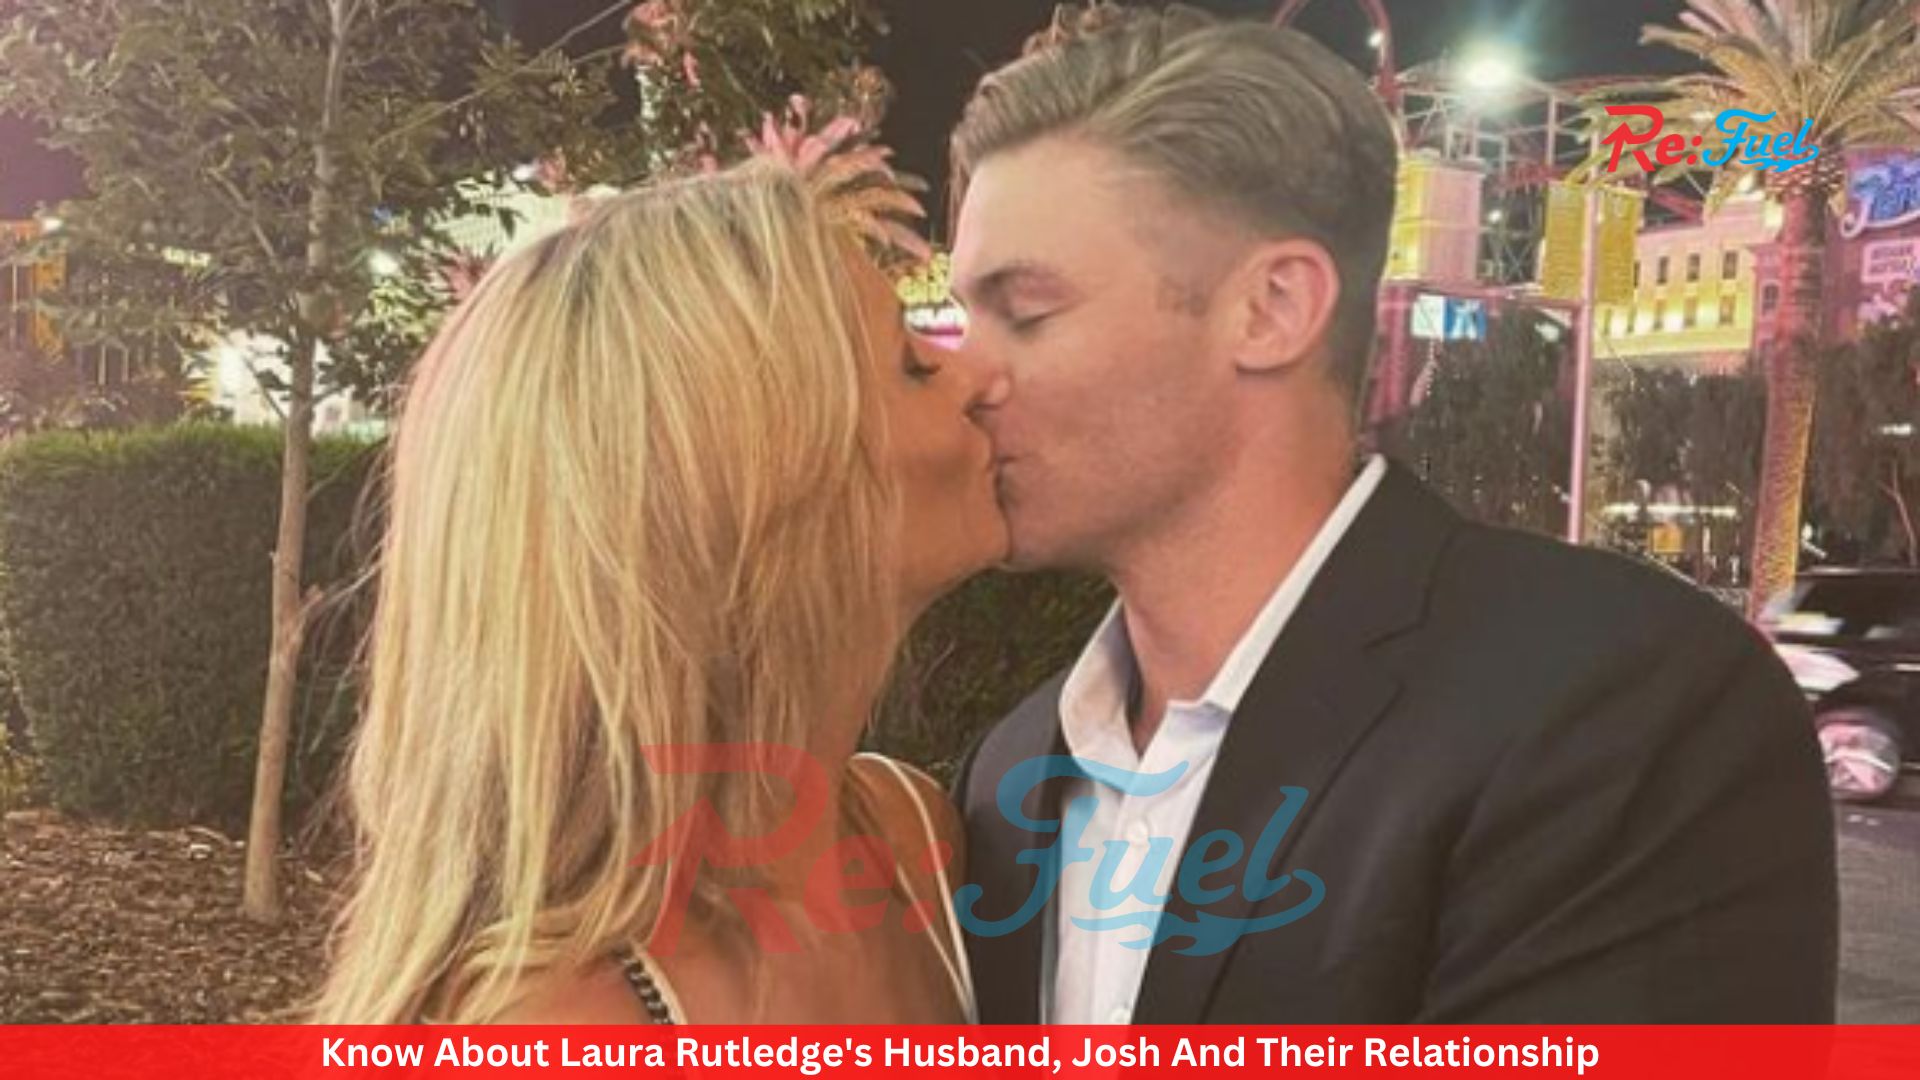 Know About Laura Rutledge's Husband, Josh, And Their Relationship